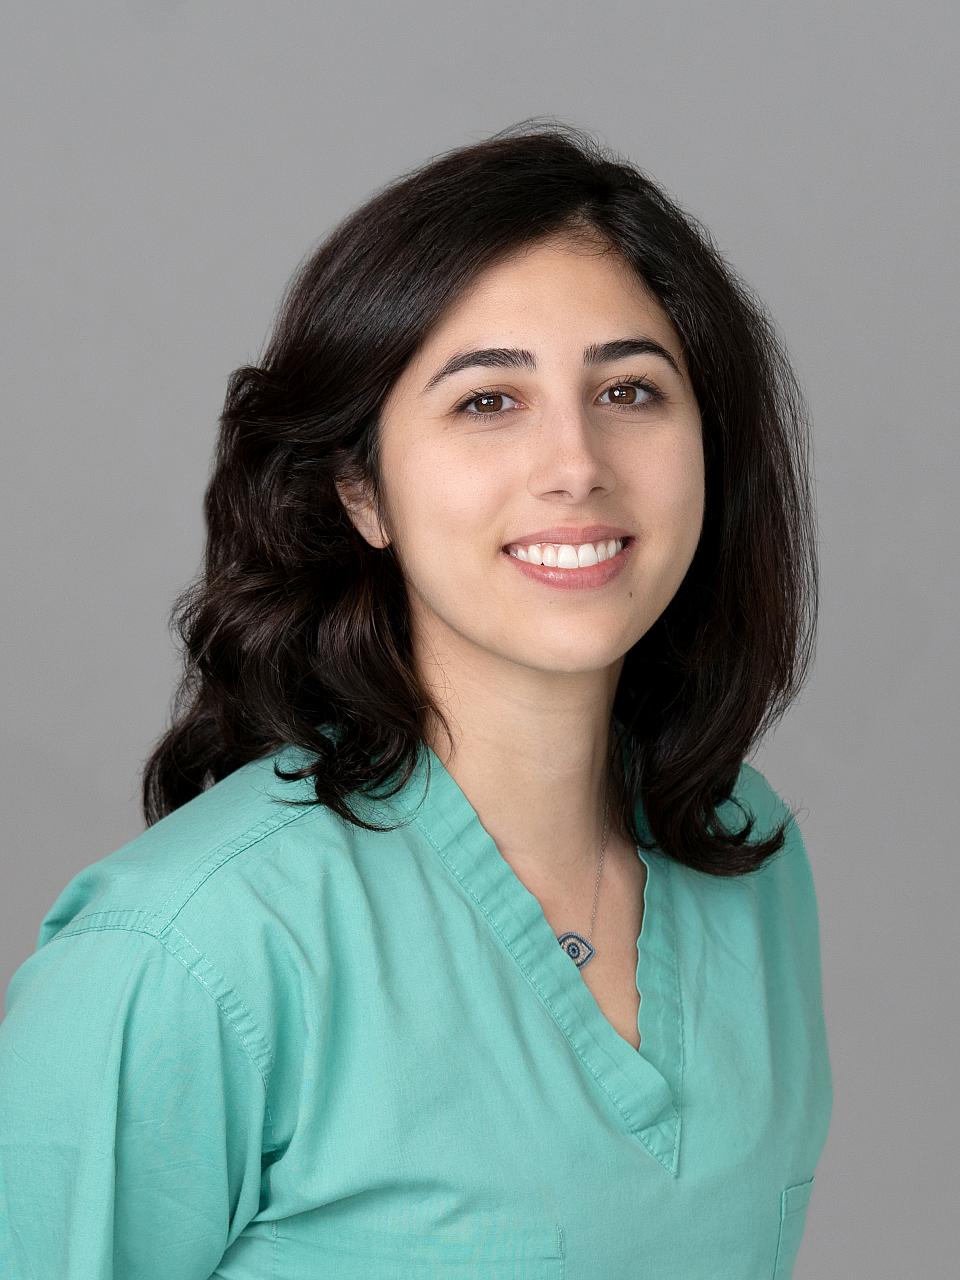 Photo of a woman, Dr. Hanna Fanous, with dark hair wearing green scrubs smiling at the camera.